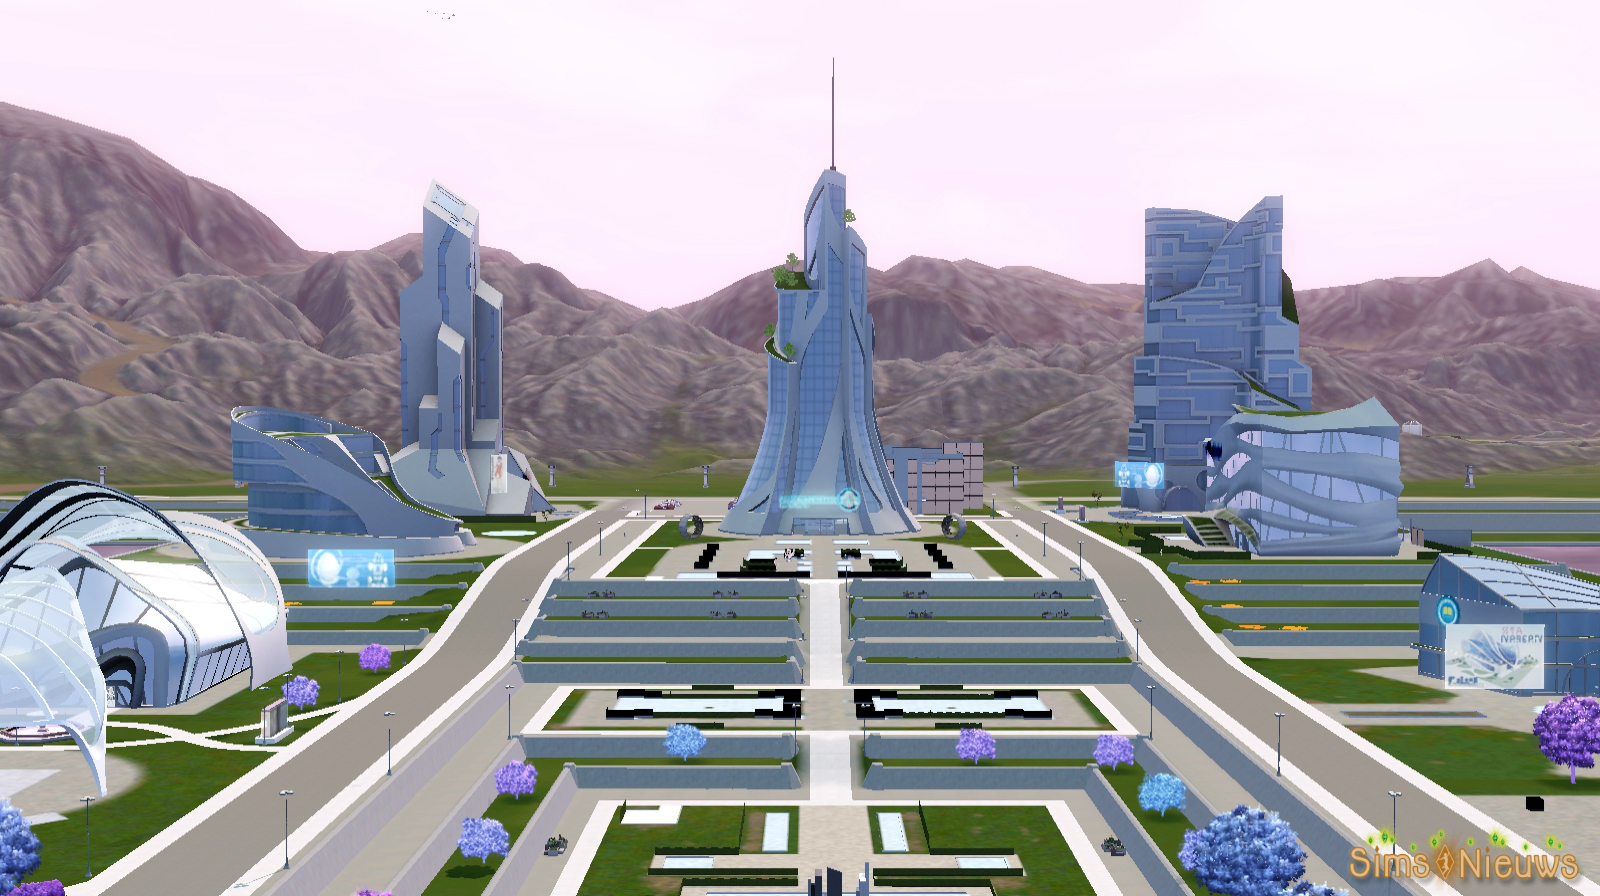 sims 3 into the future new town